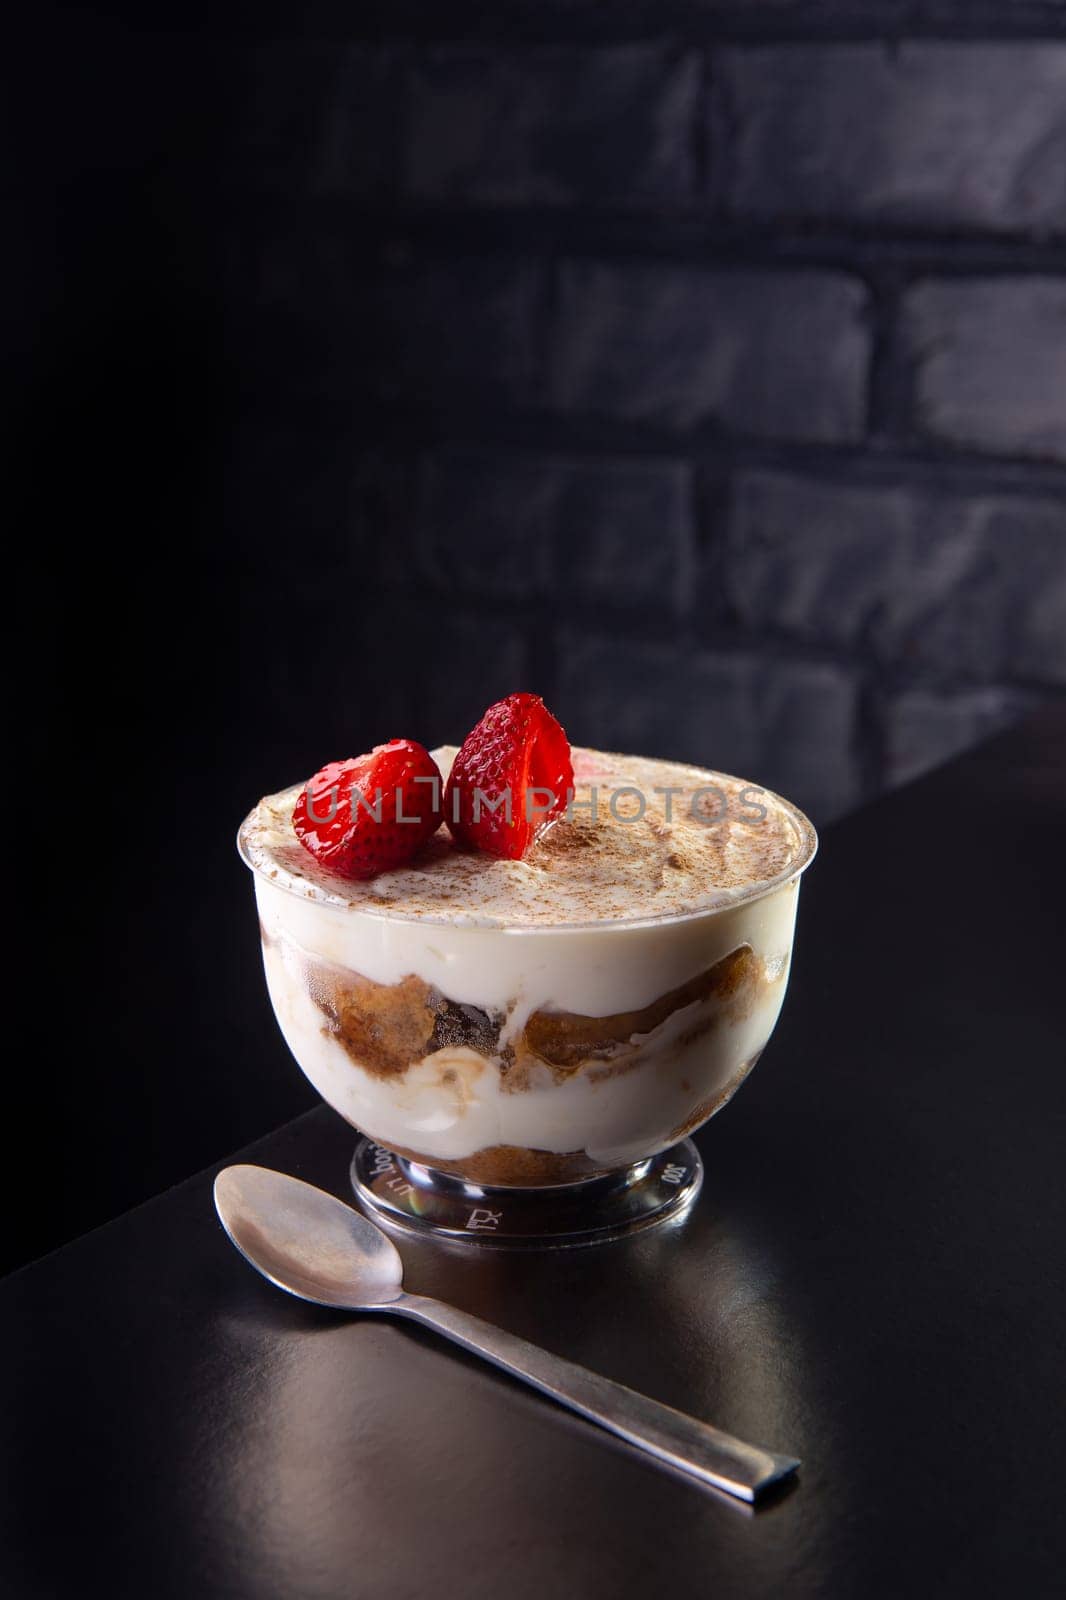 Tiramisu dessert in a glass bowl, decorated with coffee and strawberries on black table with brick wall behind